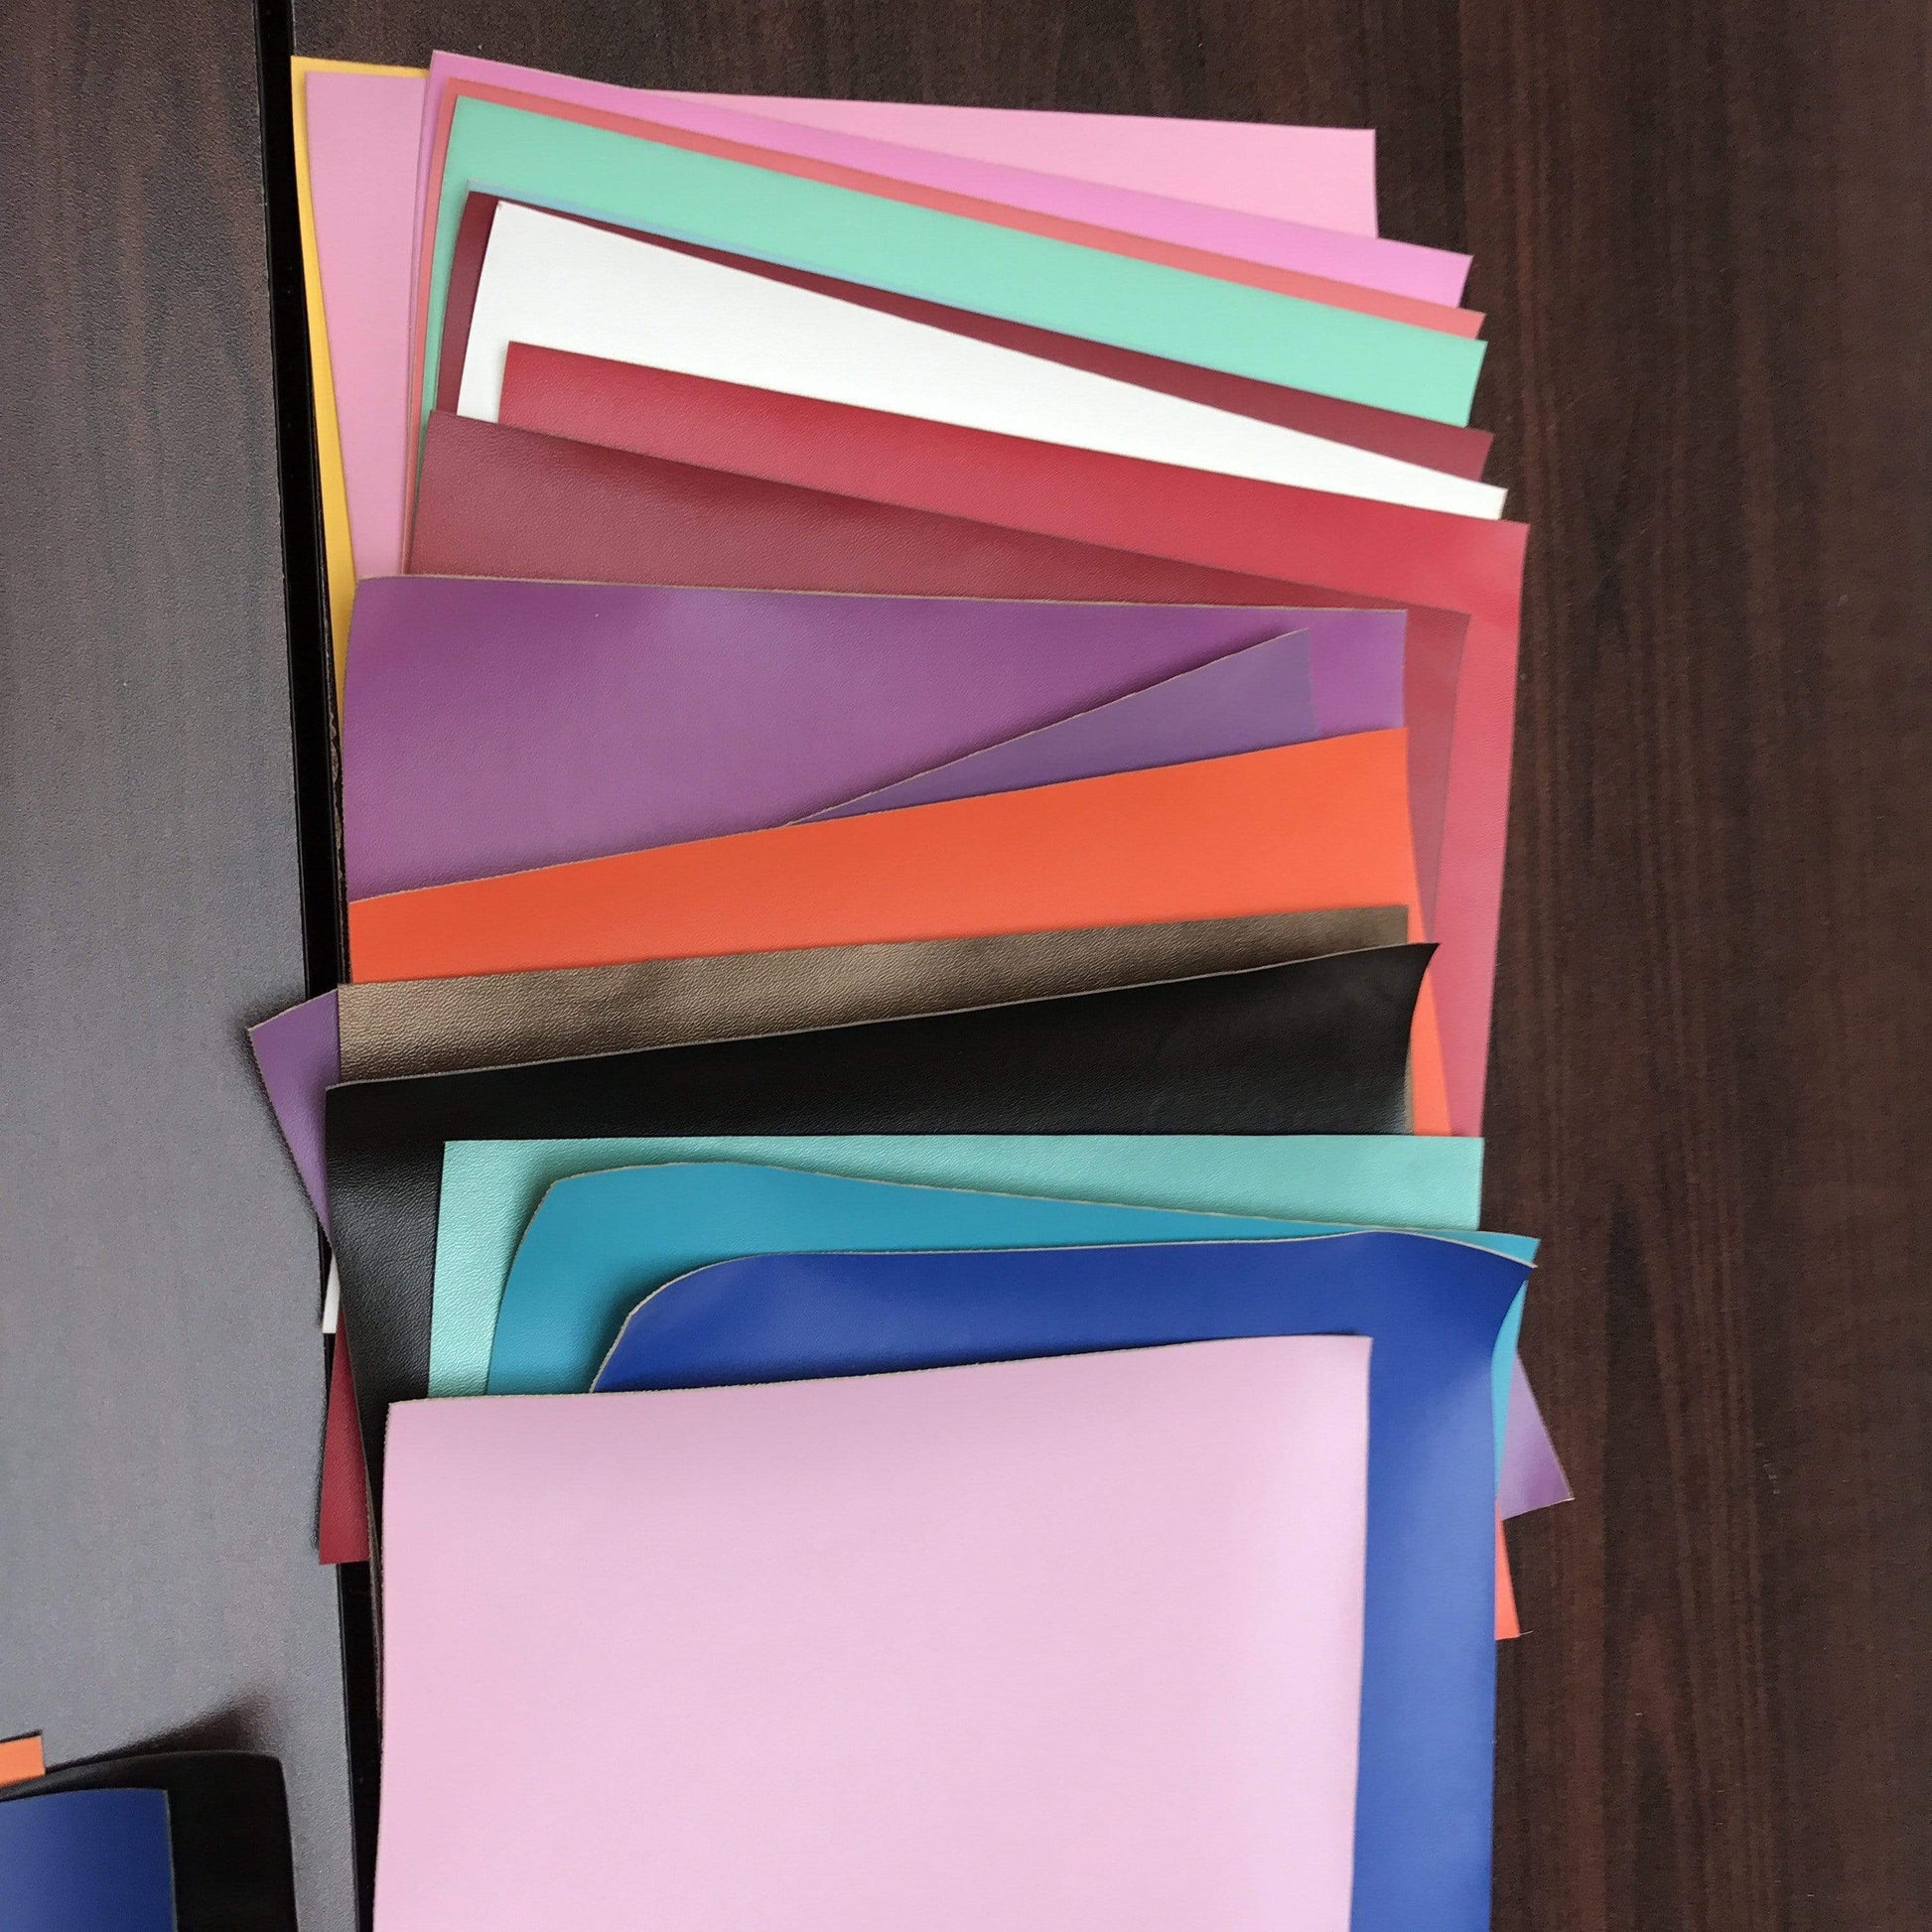 Leatherette Basics 20*22cm "Leatherette" Synthetic Leather Sheet, Multiple Colour Choices: Original Leatherette And Glitter